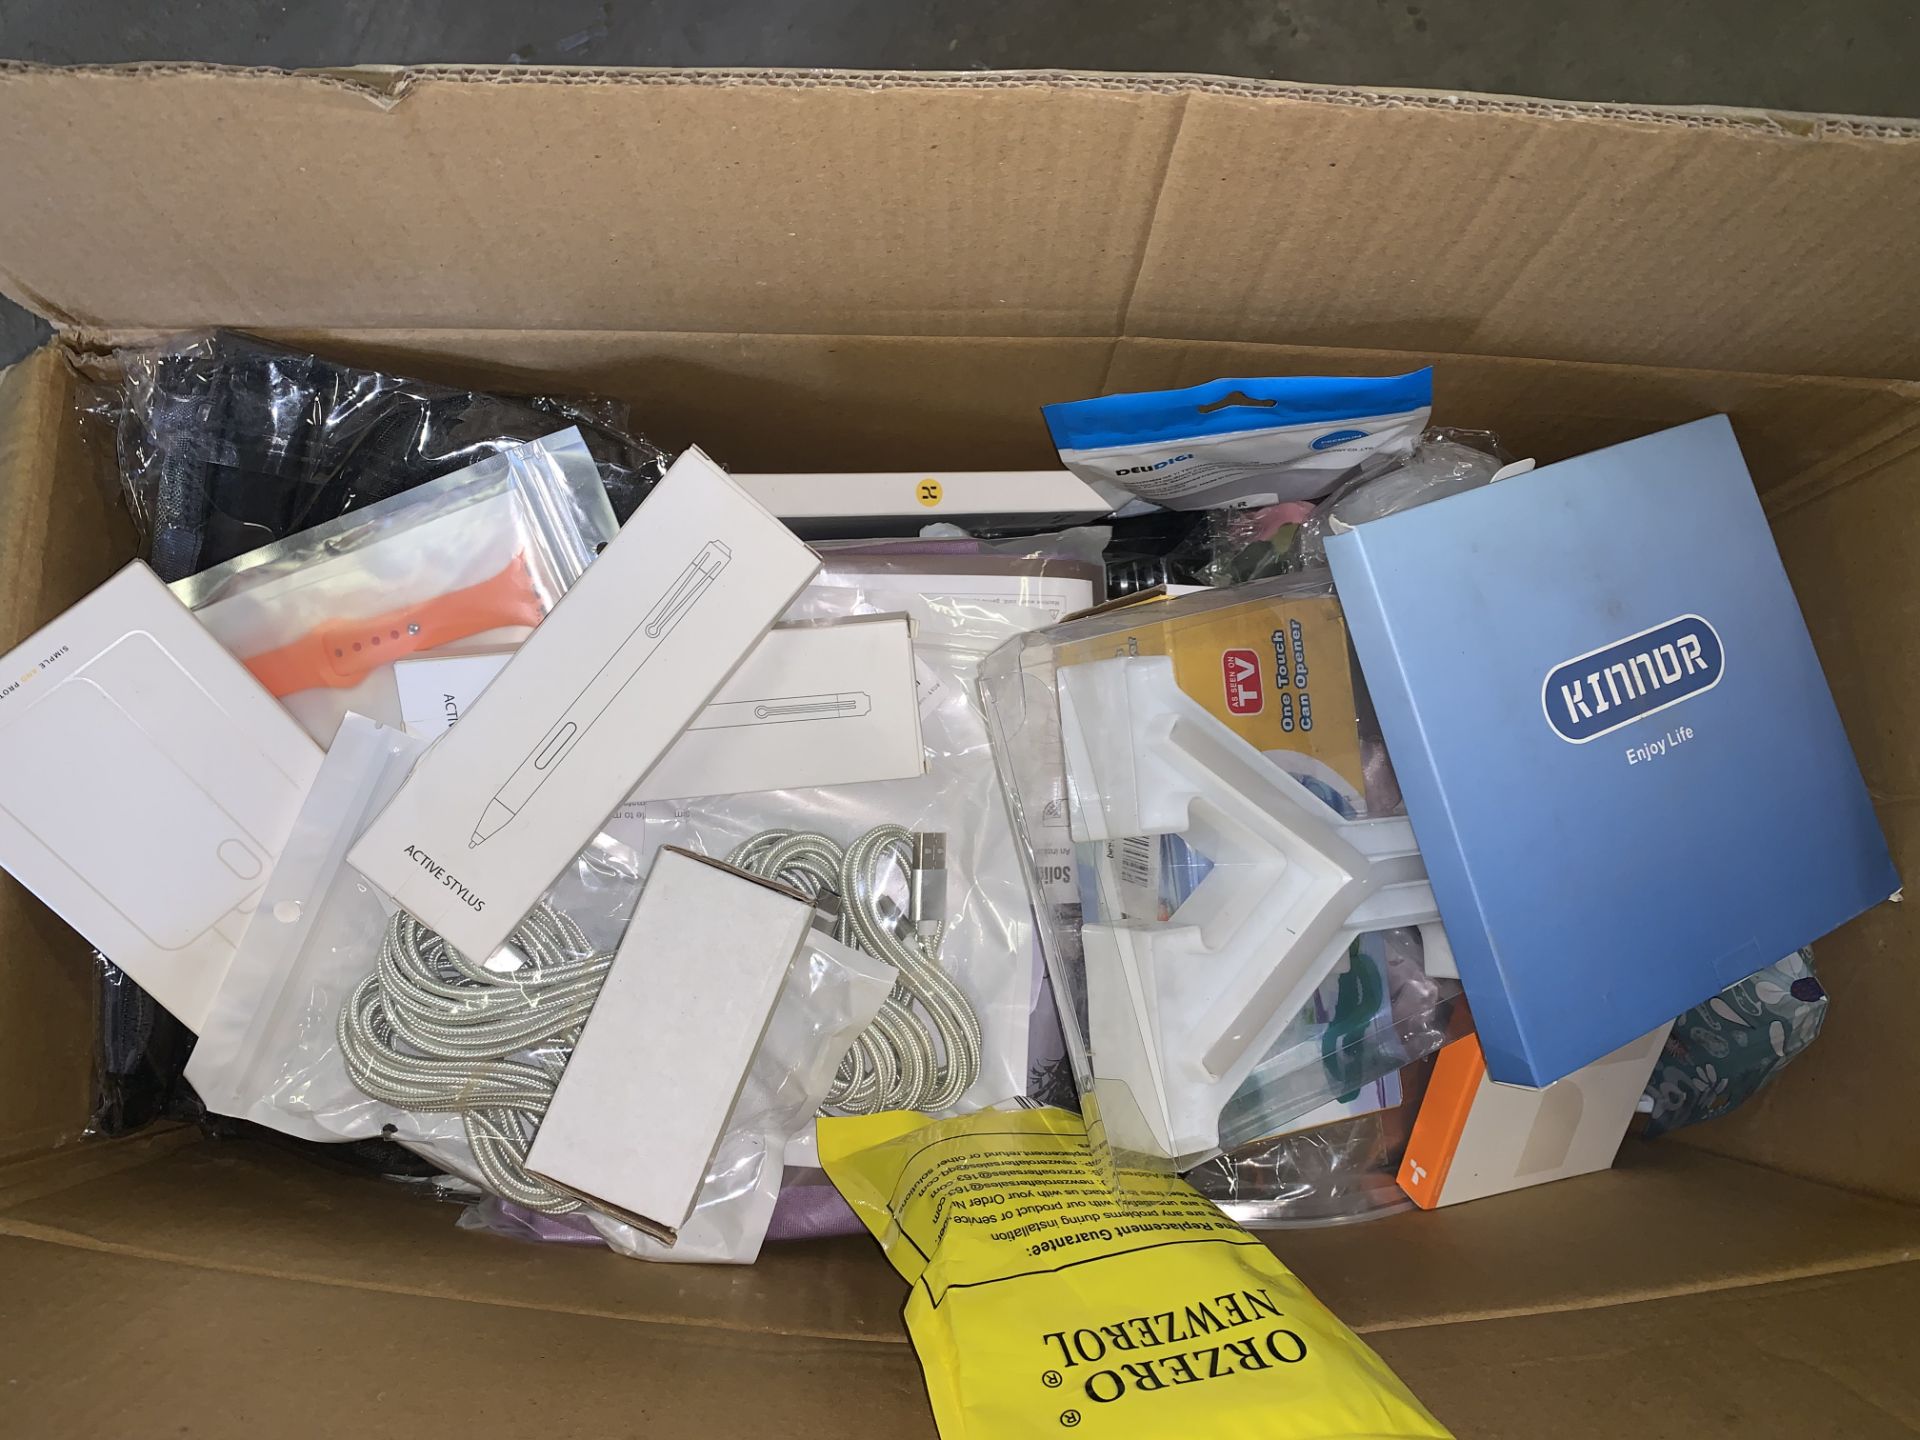 50 PIECE AMAZON END OF LINE LOT INCLUDING CAN OPENERS, STYLUS PENS, PHONE CHARGER CABLES ETC